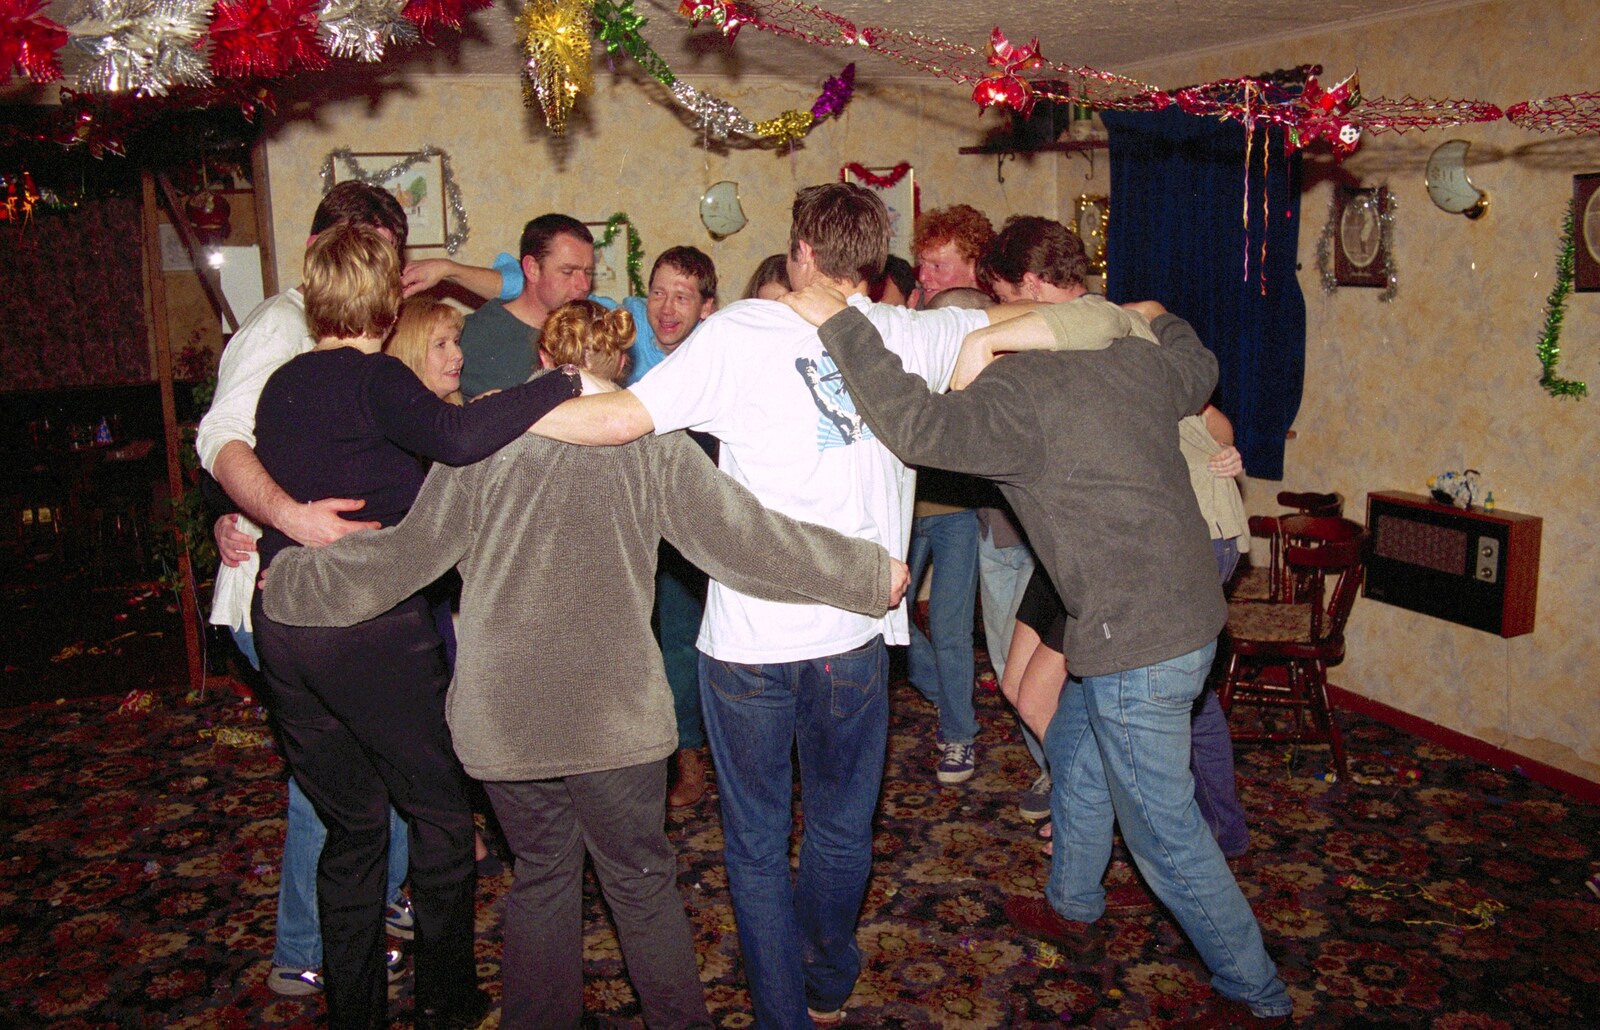 Another dancing scrum - Apple's in there somewhere from New Year's Eve at The Swan Inn, Brome, Suffolk - 31st December 1999